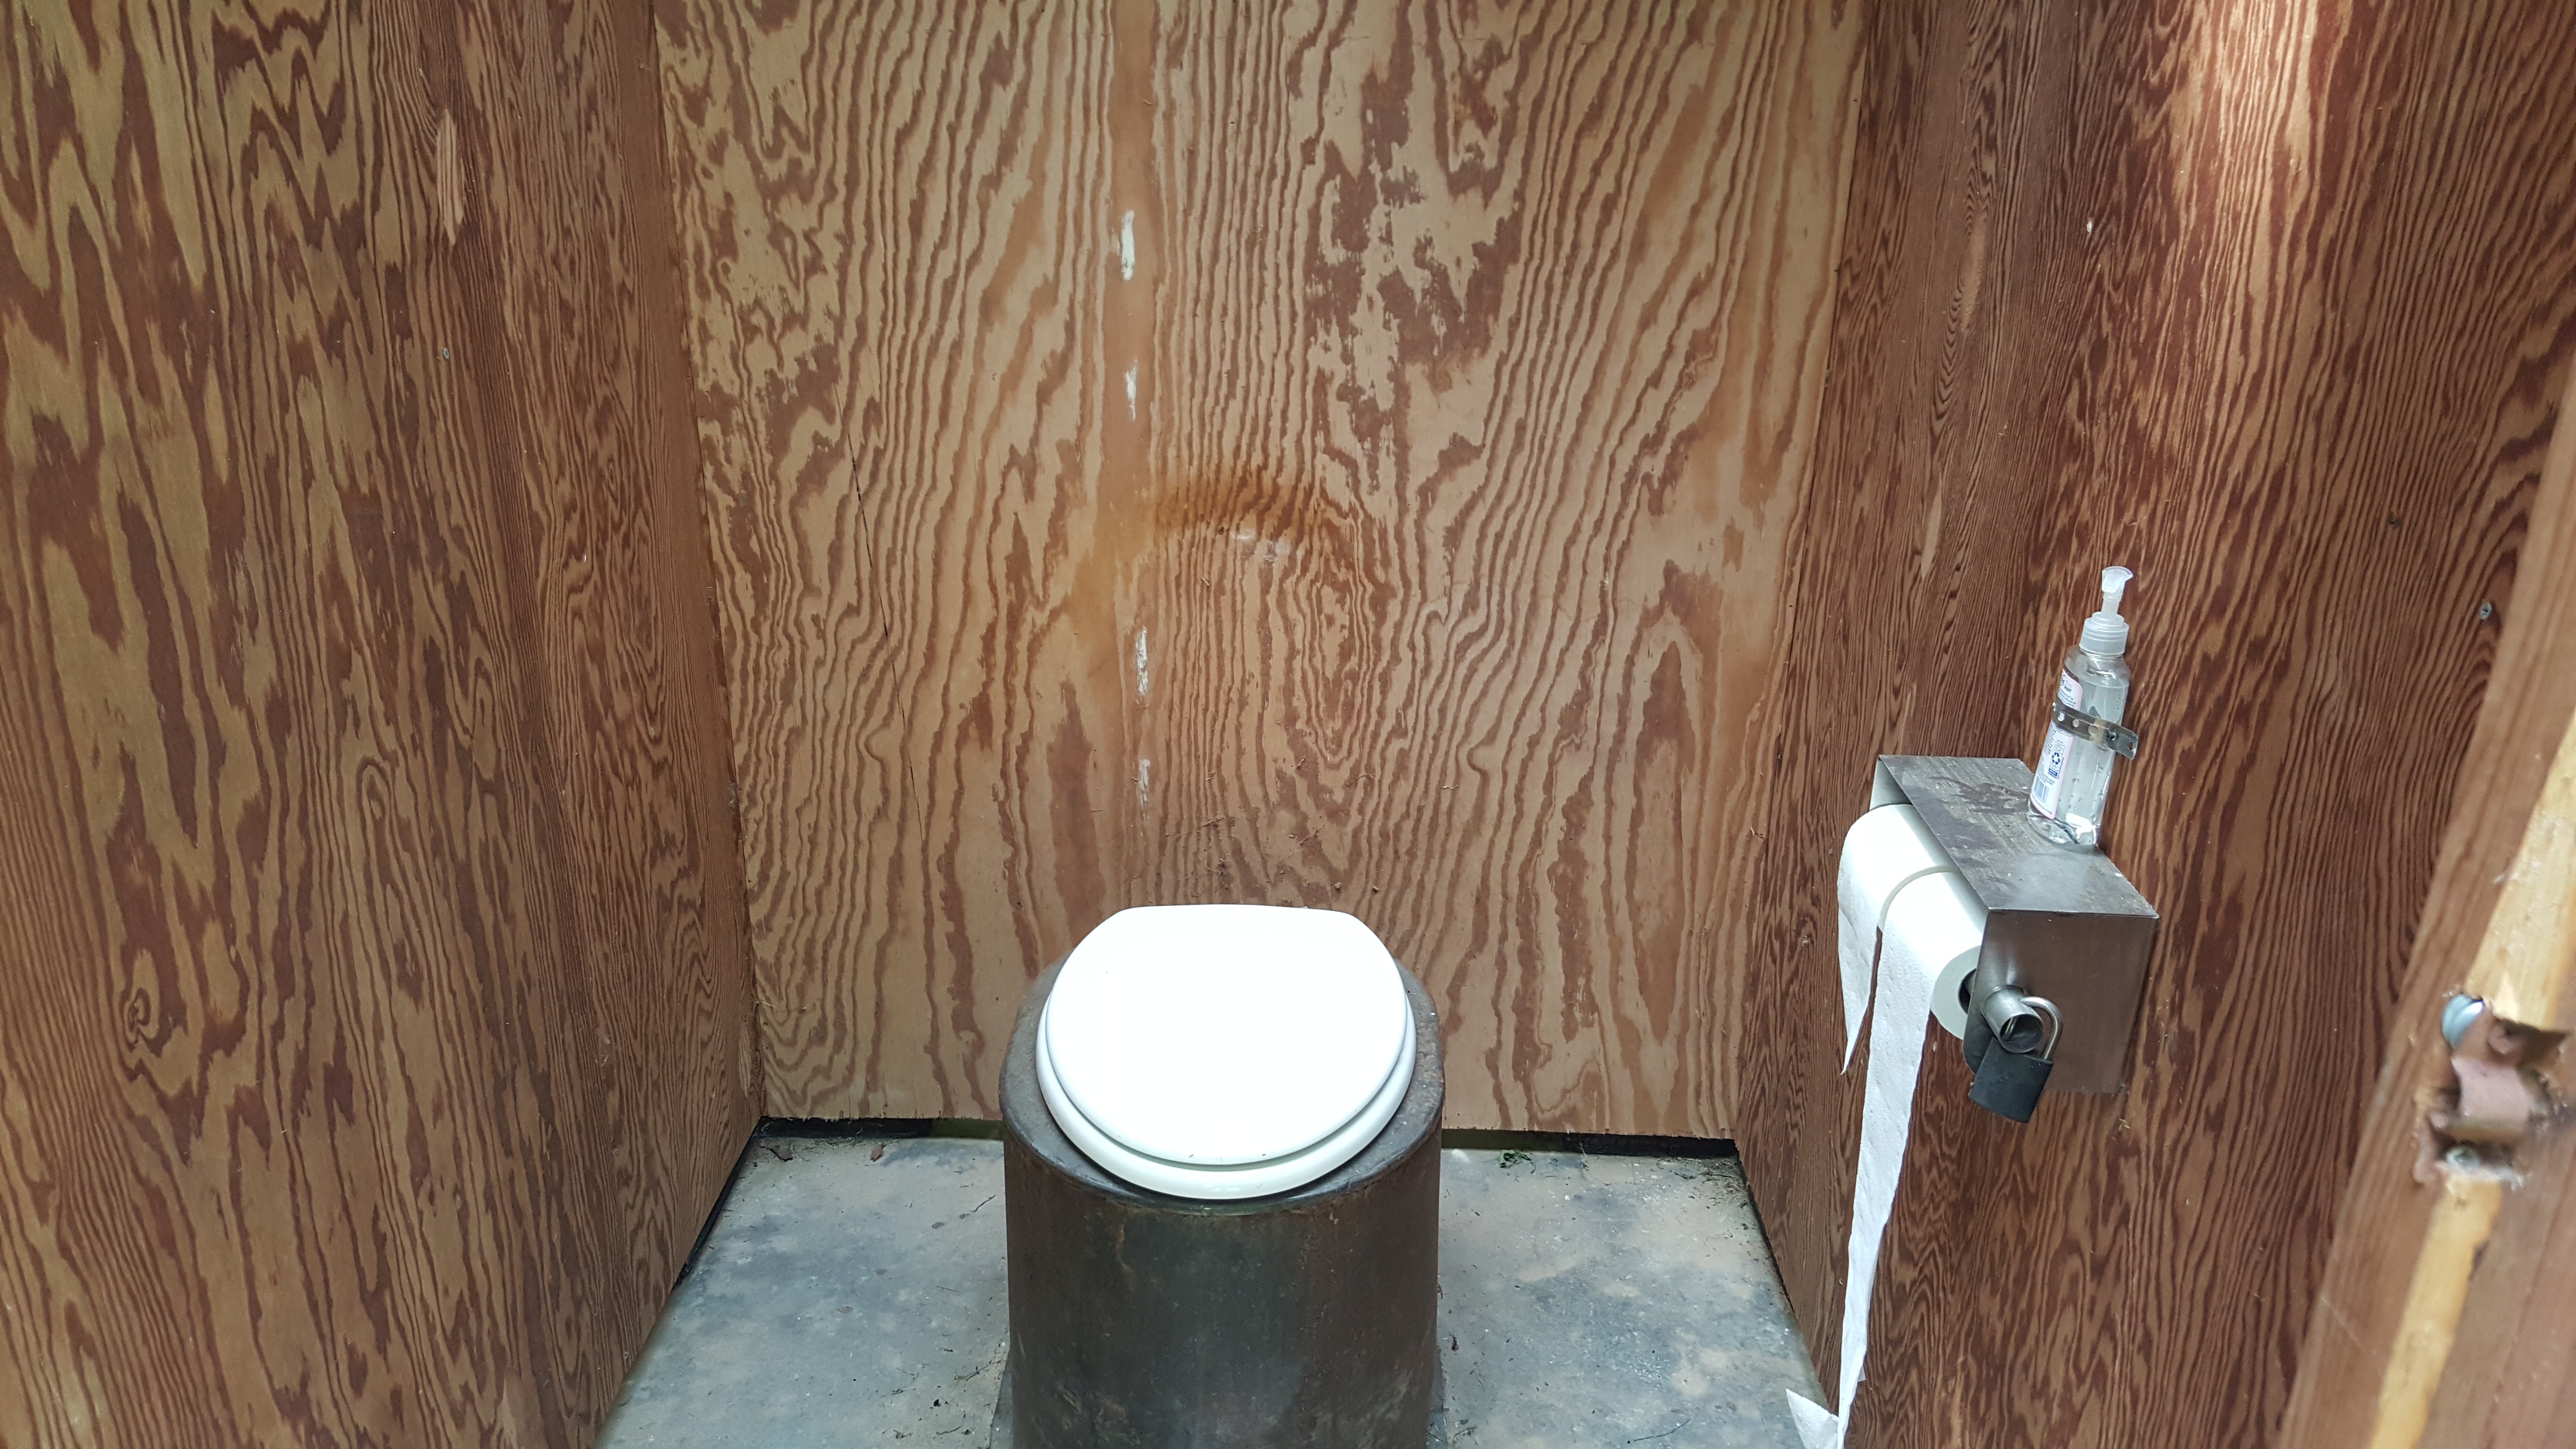 It is a vault toilet but one of the best I have been to in terms of being clean. Toilet paper and hand sanitizer provided